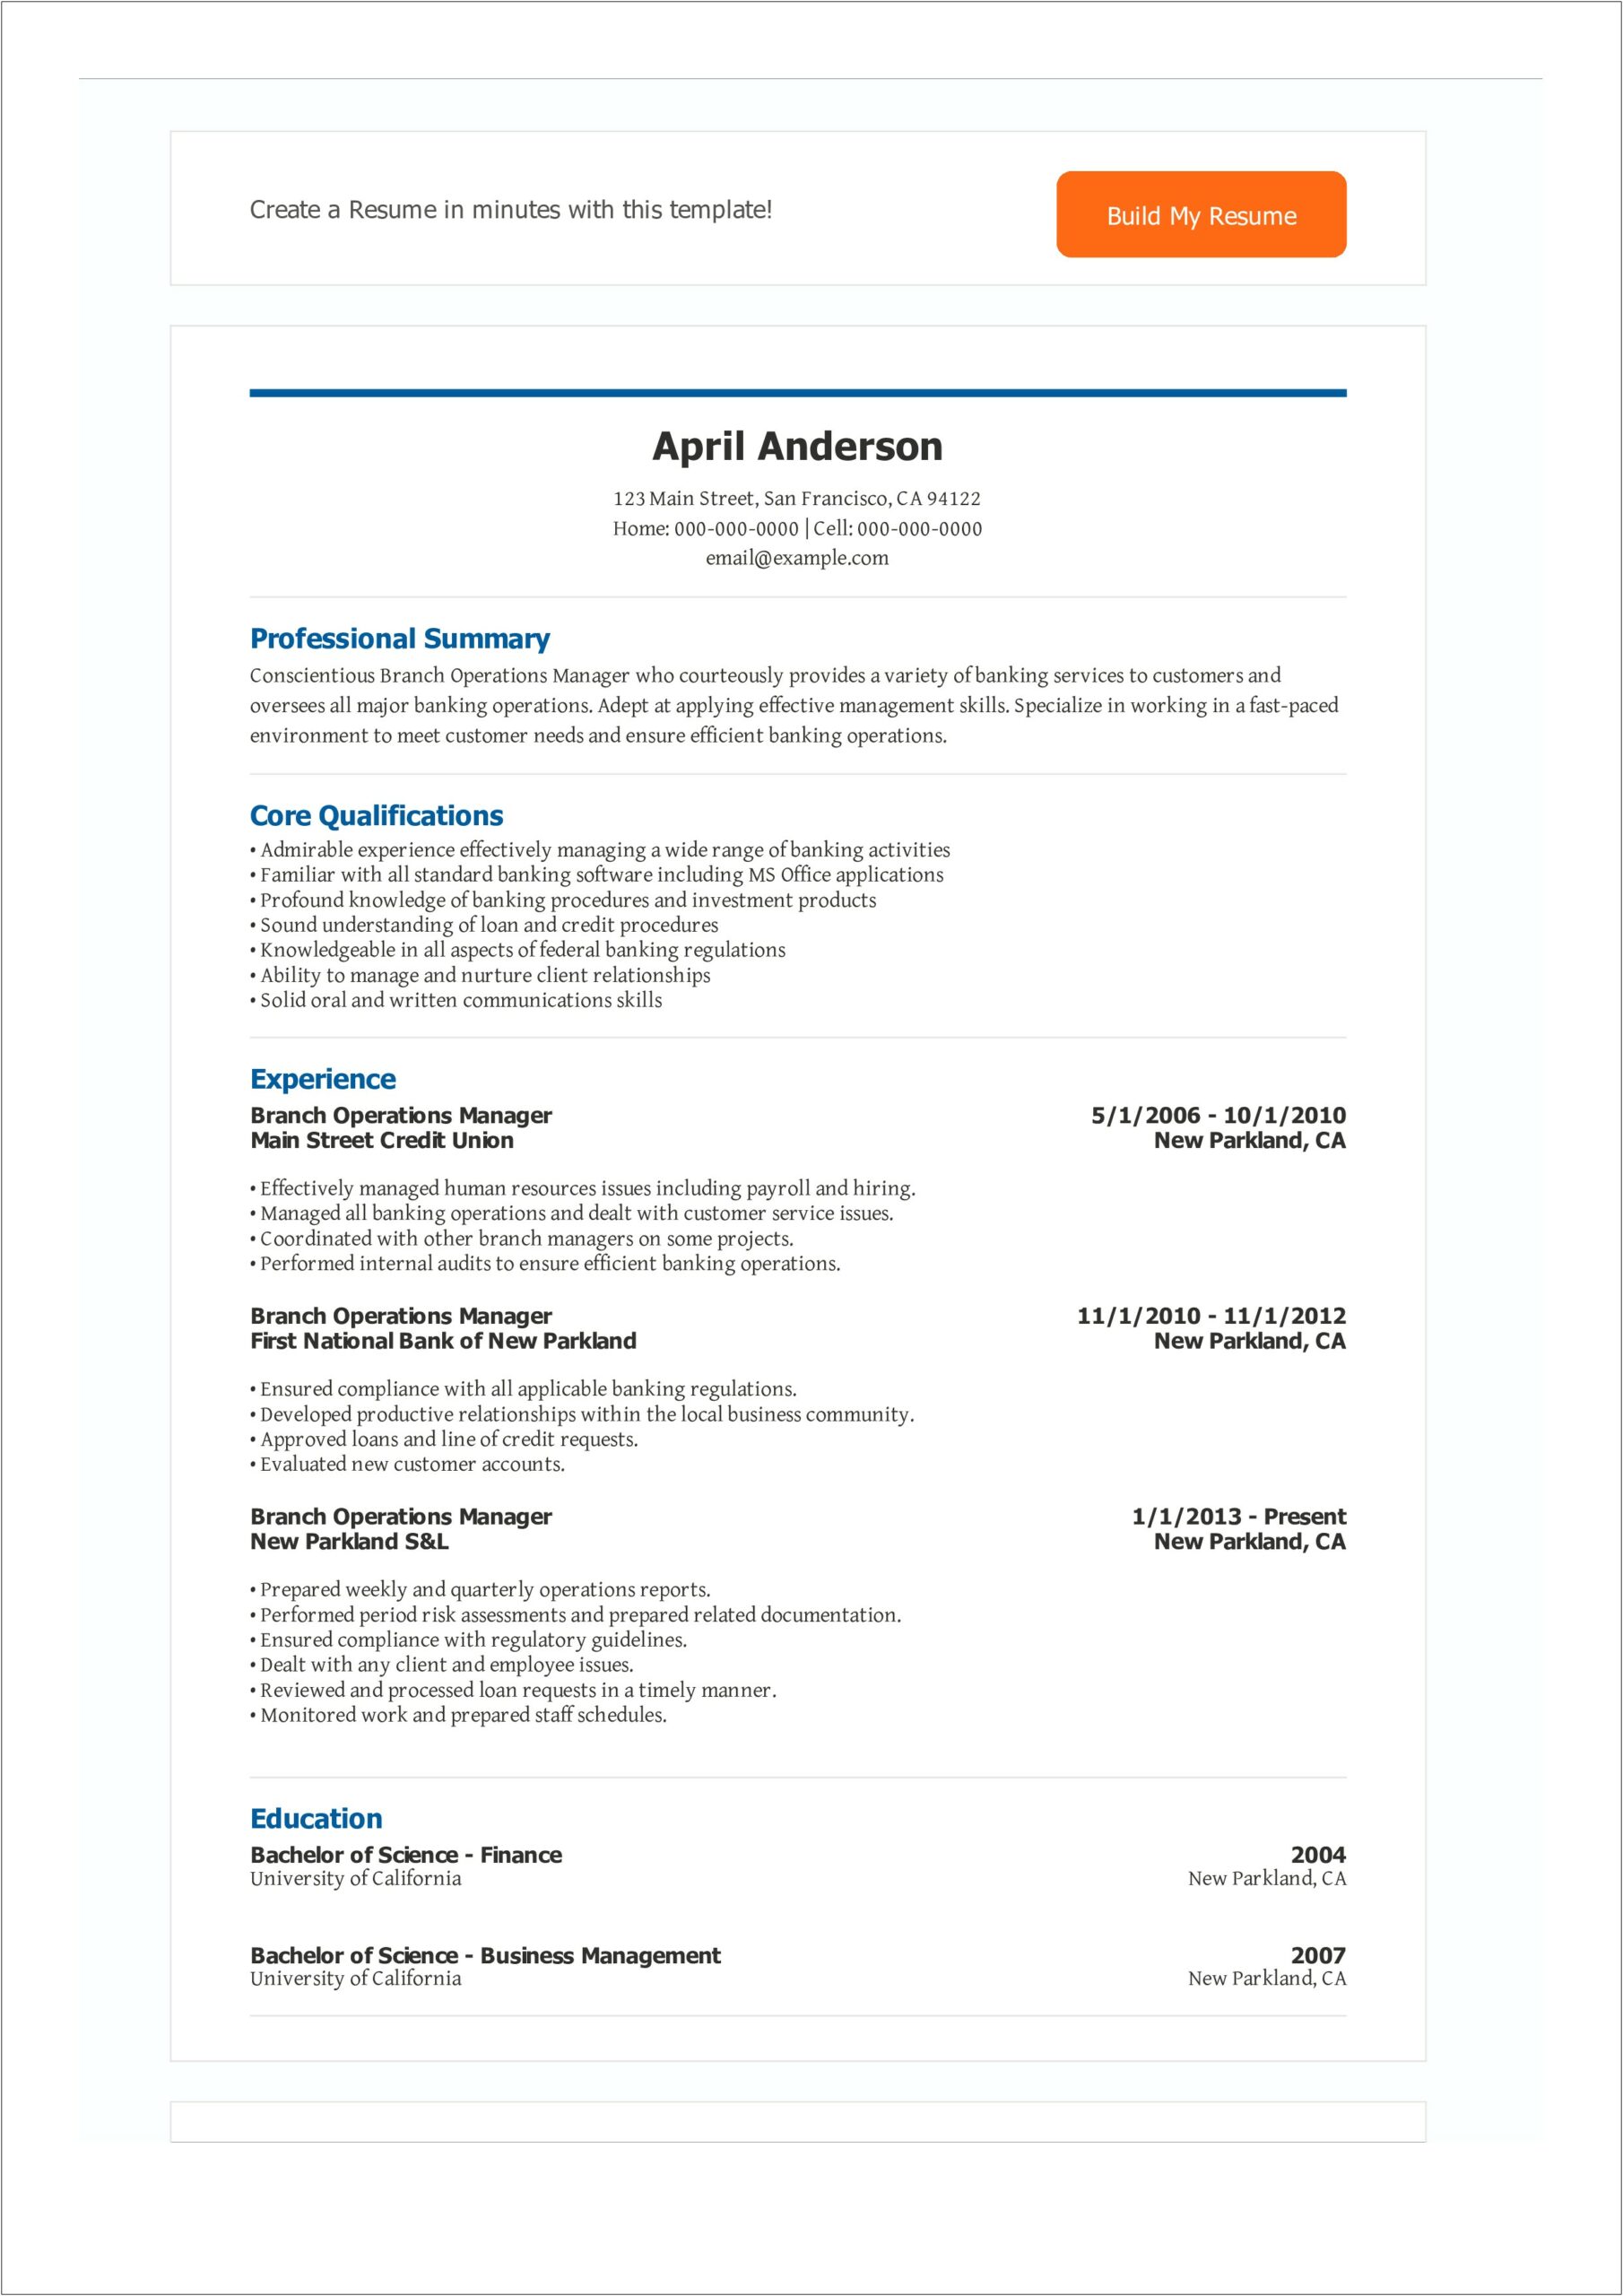 Resume For Applying Bank Manager Post